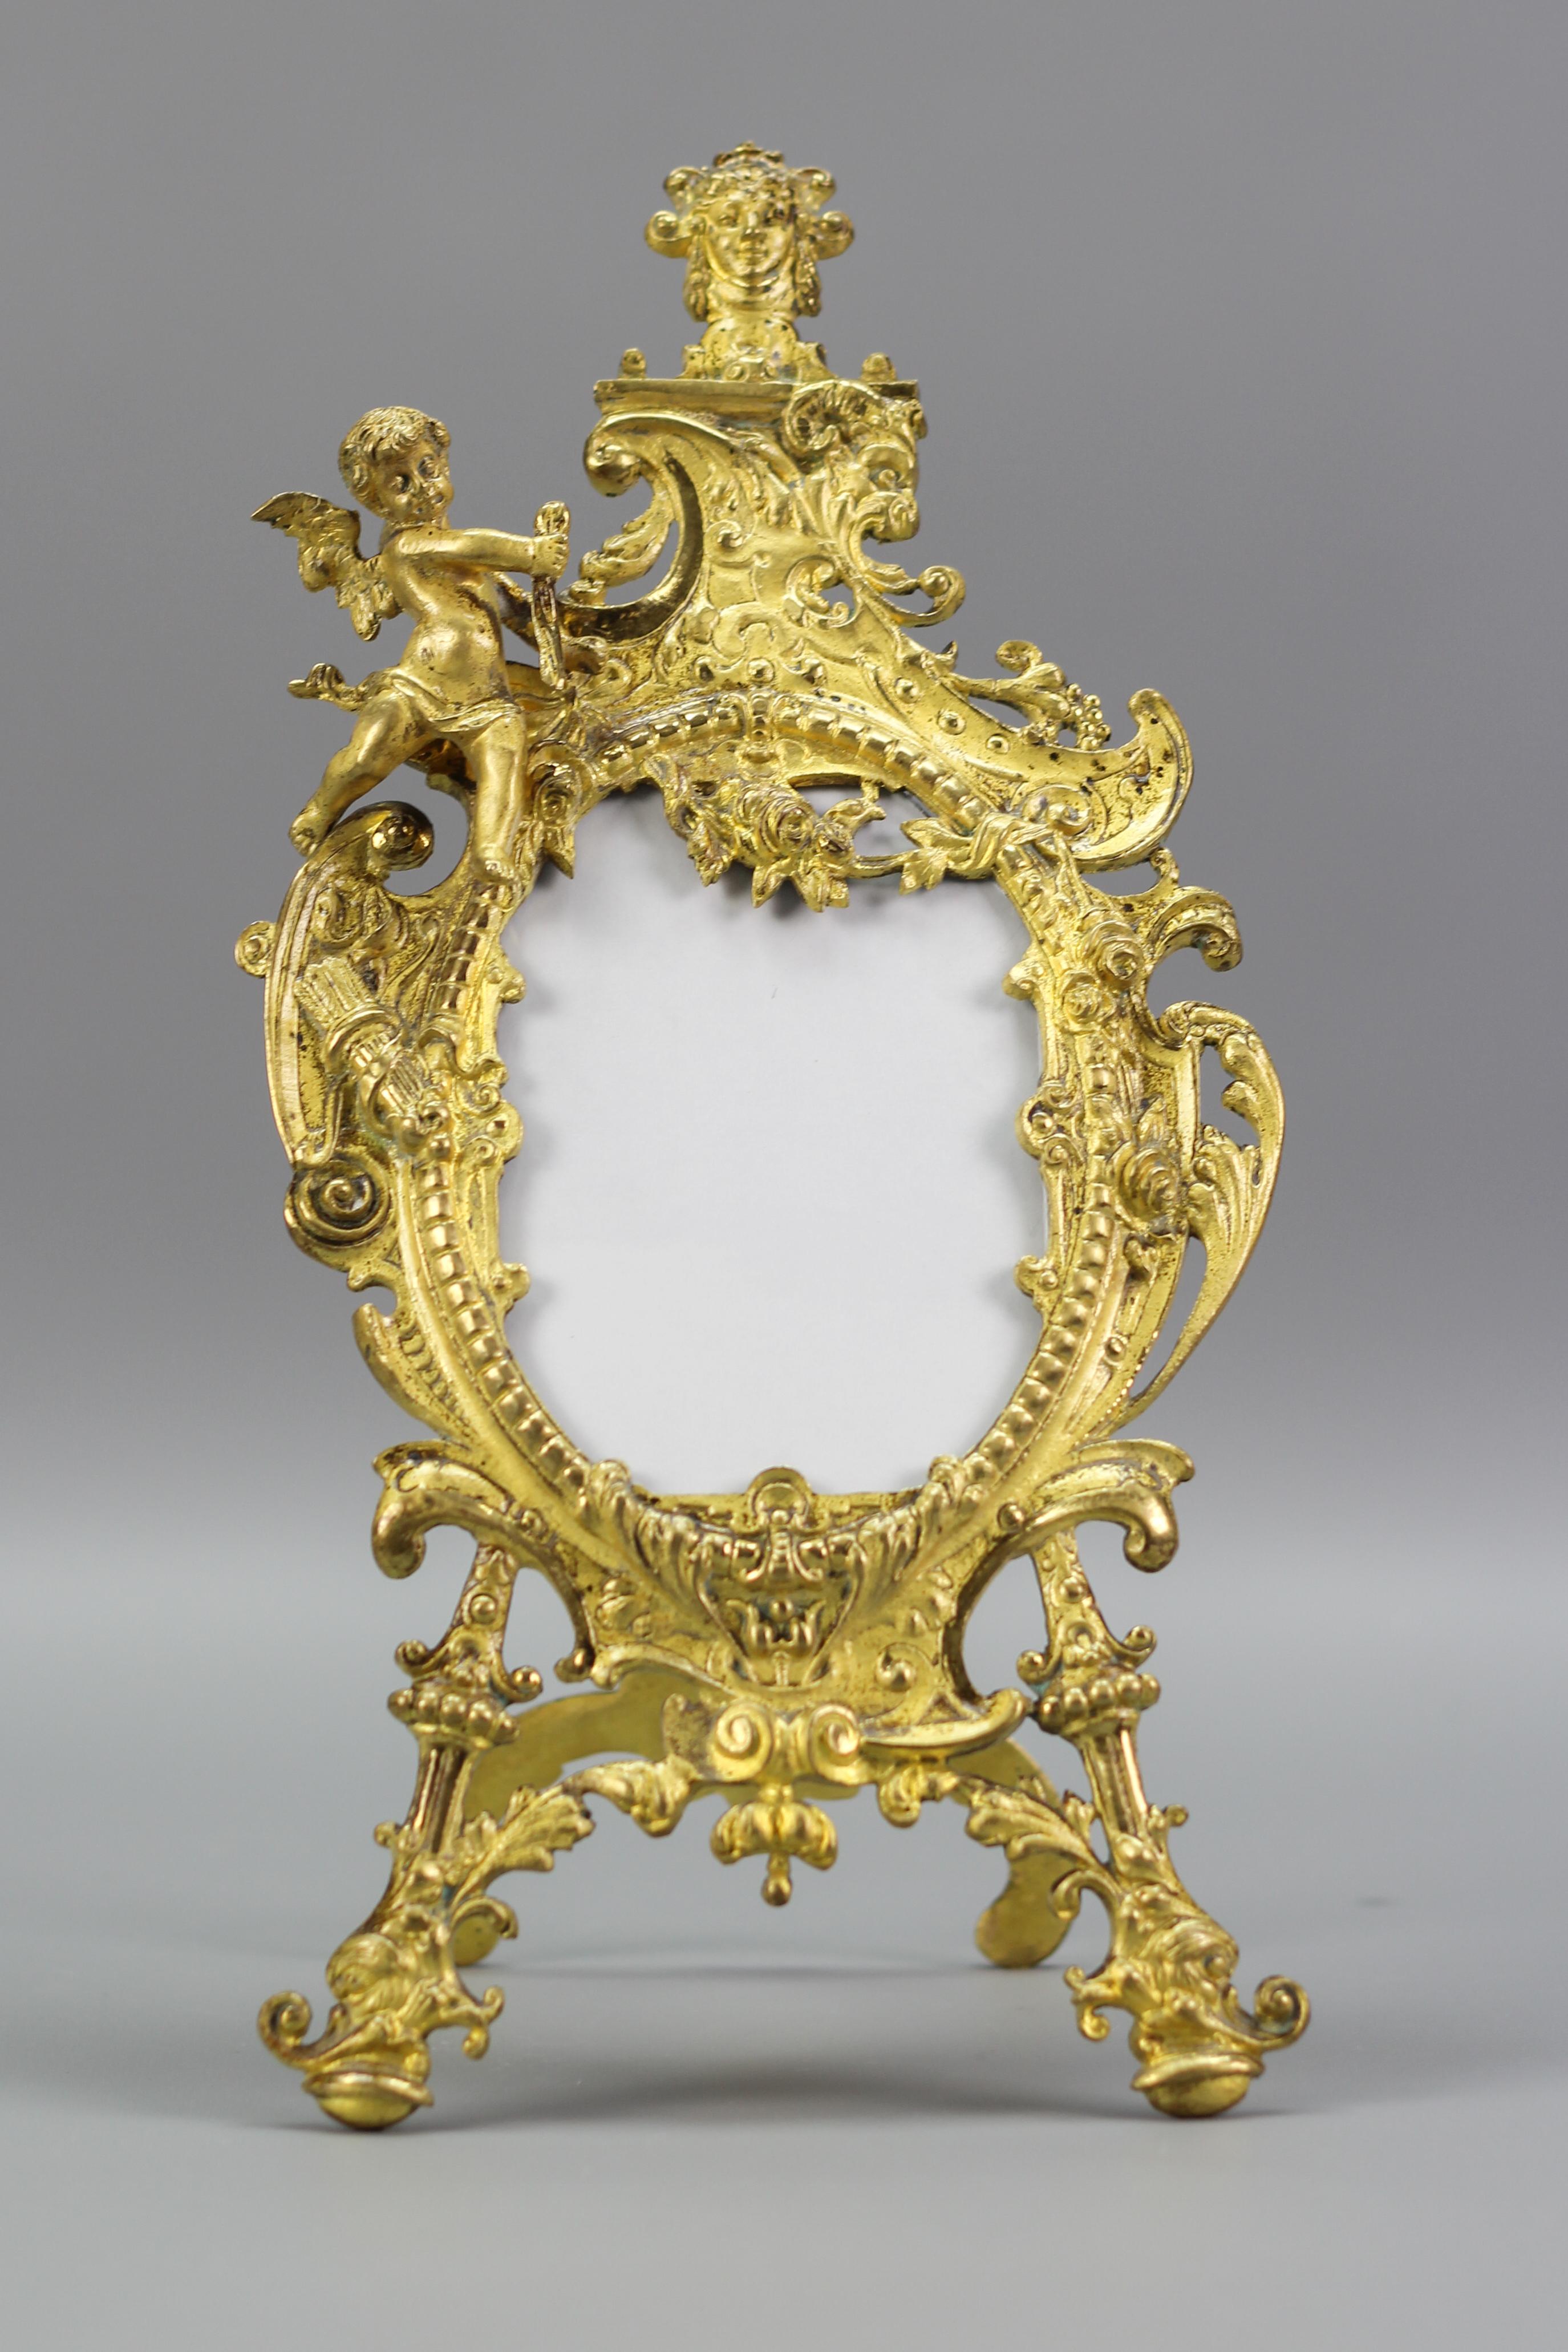 An adorable gilt bronze photo frame, richly decorated with a cherub and Neoclassical or Louis XVI style motifs like a face of a goddess, garlands of flowers, foliage, darts, and a face of a satyr. This beautiful oval-shaped picture frame features an